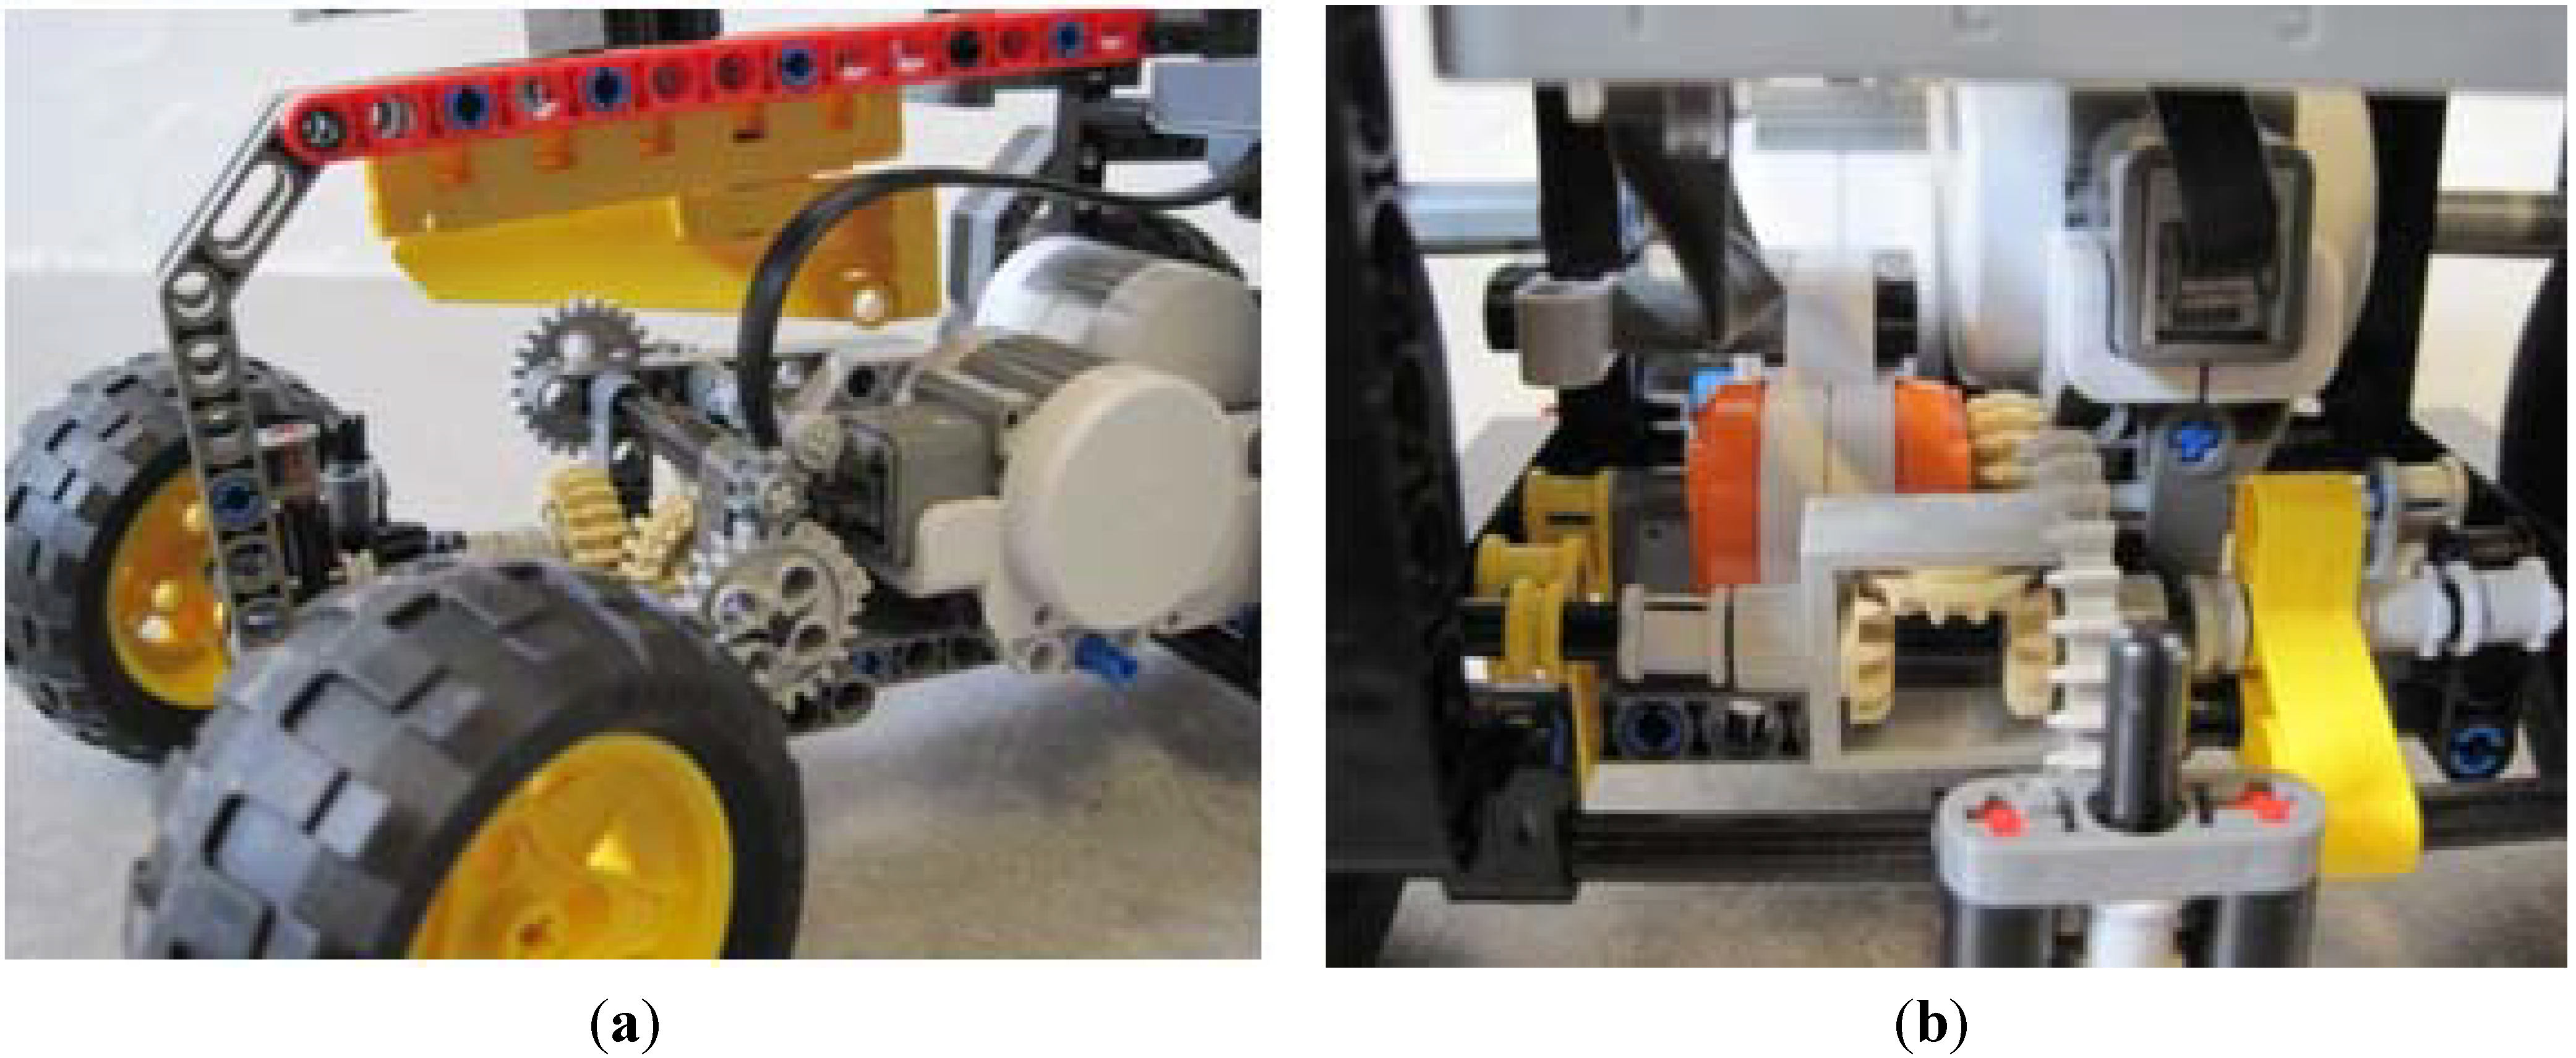 Robotics | Free Full-Text | A Test Platform for Planned Field Operations  Using LEGO Mindstorms NXT